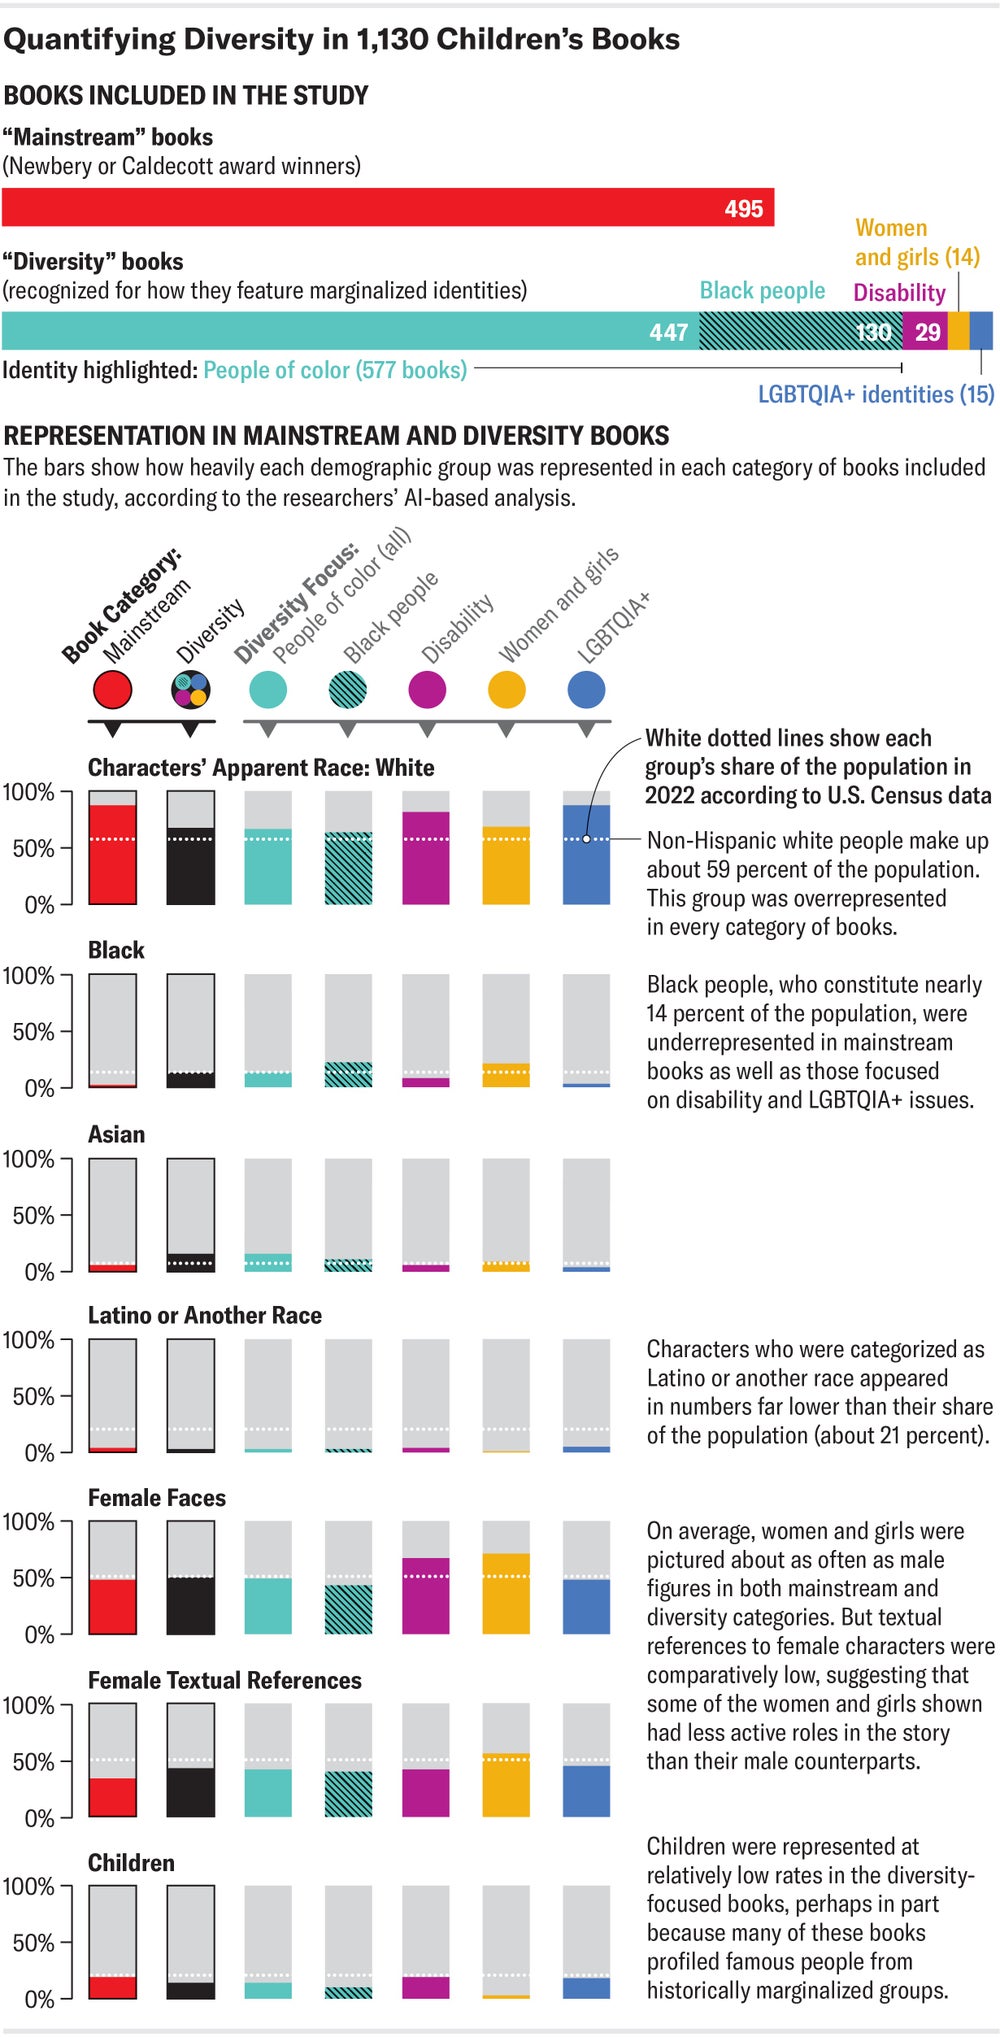 Stacked bar charts show how many “mainstream” and “diversity” books were included in the study, as well as the breakdown of identities highlighted in the diversity-focused ones. Smaller charts show how heavily various demographic groups were represented in each category of books.